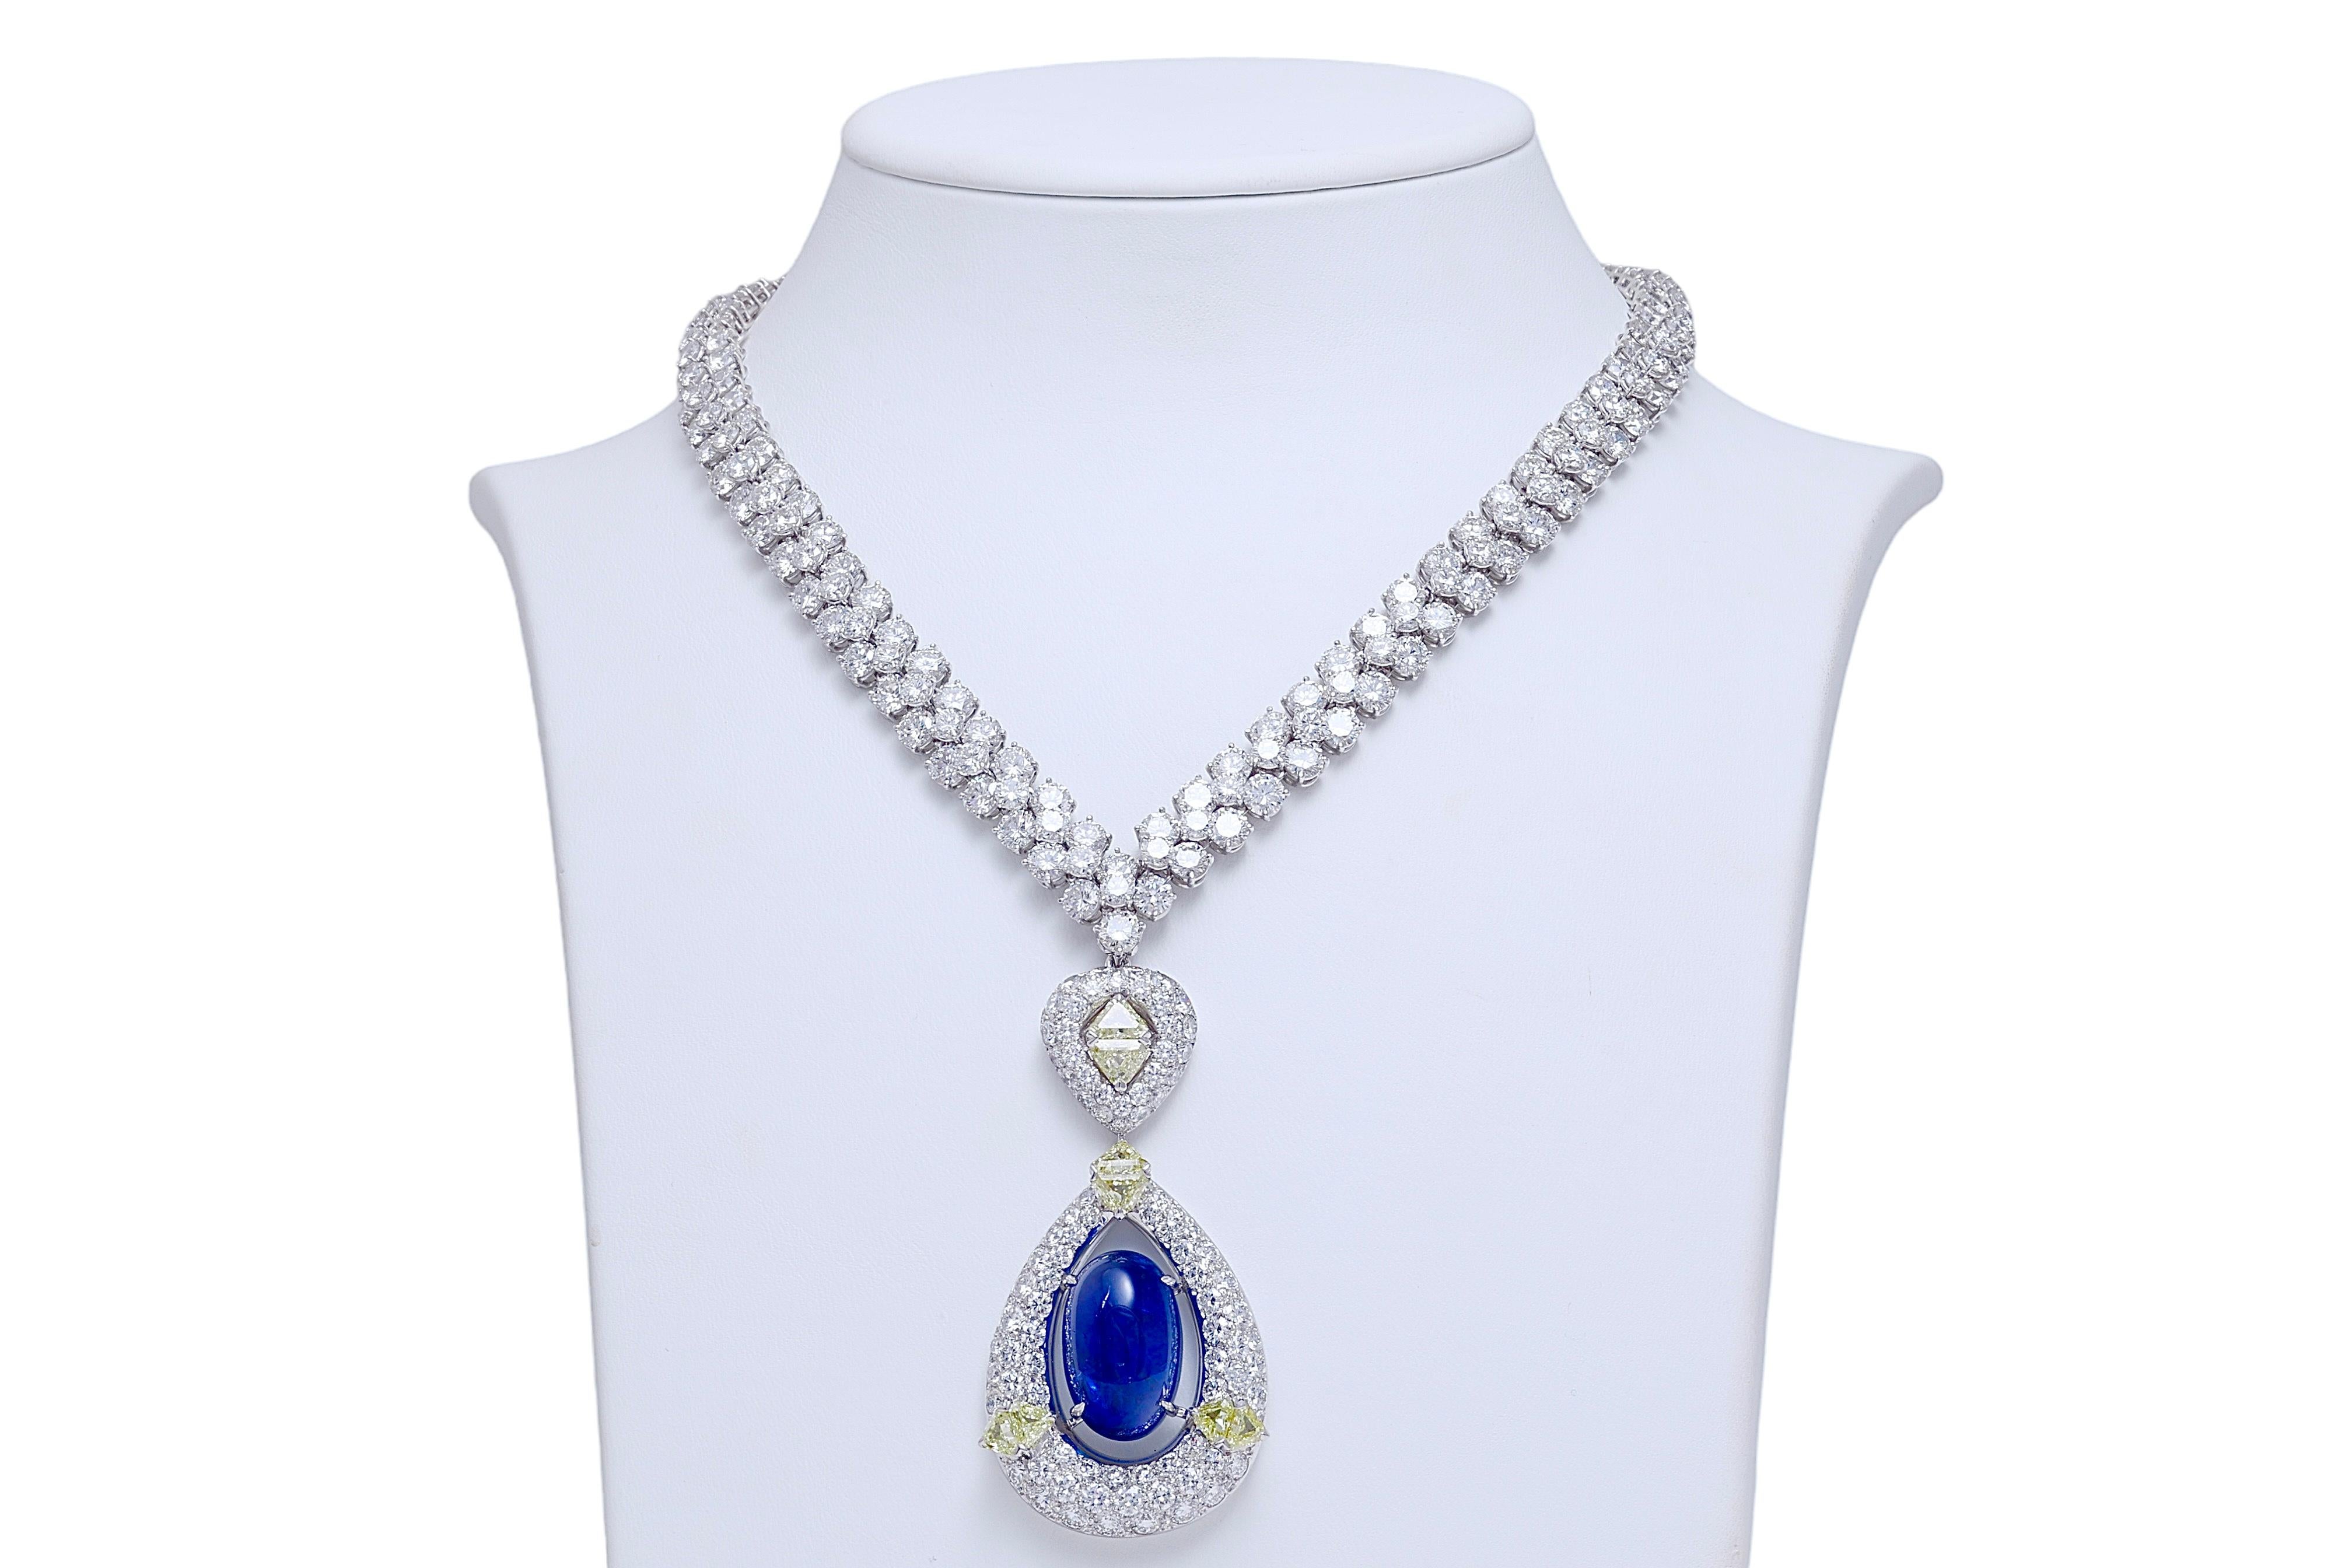 Massive Adler Genève Tennis Necklace With Fabulous Asprey London Pendant With 28.7 Ct. No Heat Burmese Sapphire , Total Diamonds  77 ct. from Estate Sultan Of Oman Qaboos Bin Said

One of a kind piece of art !

Necklace can be separated to be worn